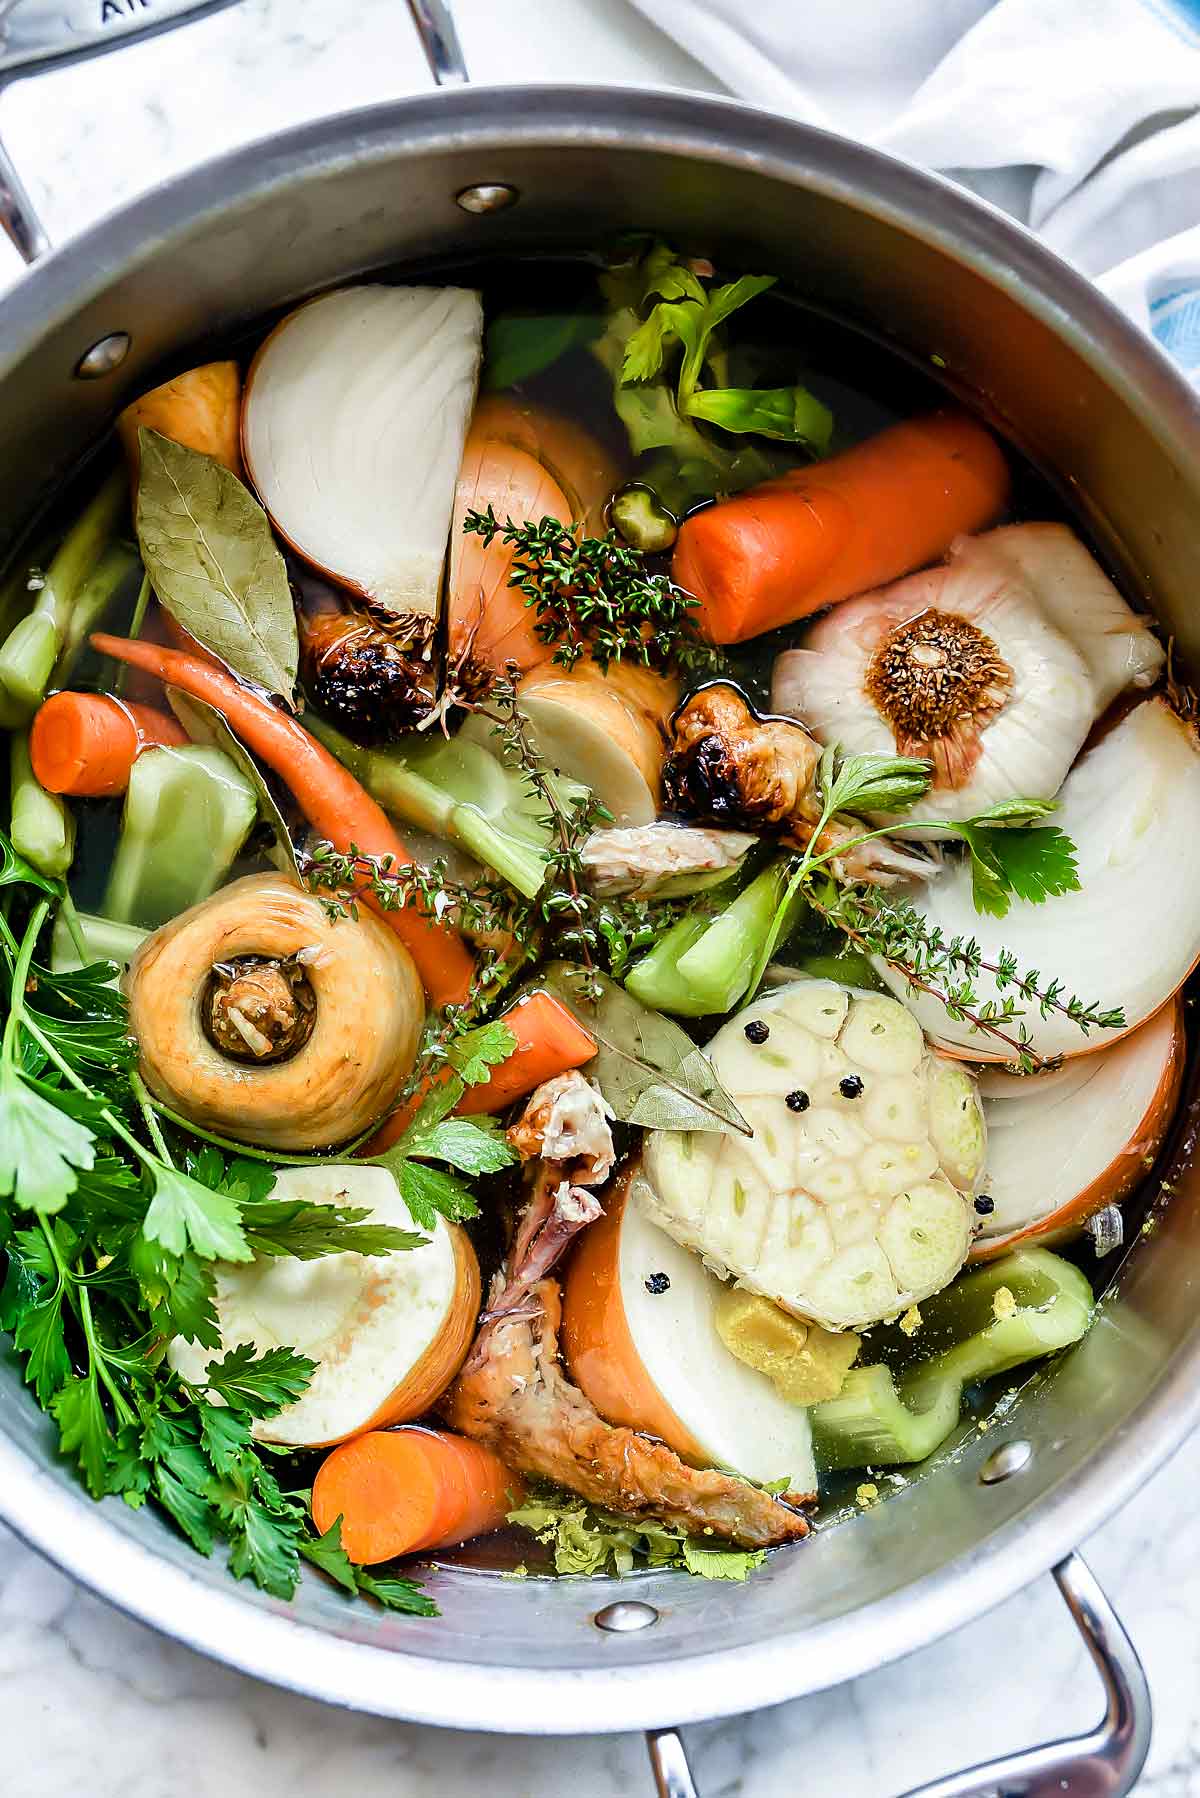 Why Recipes Say to Bring to a Boil, Then Reduce to Simmer